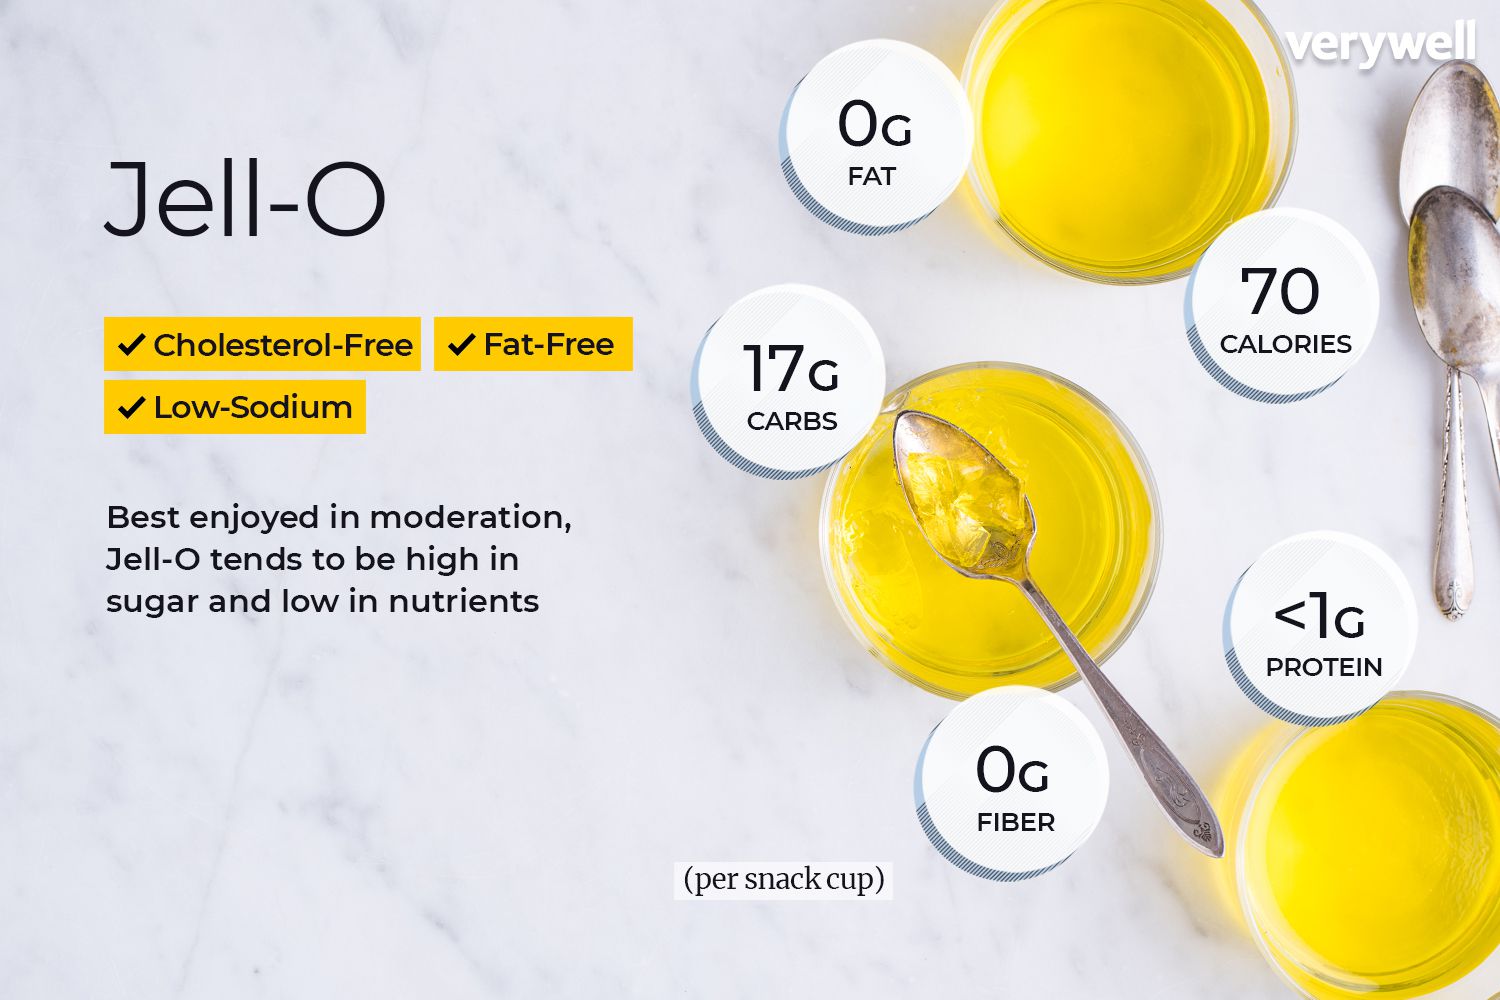 Jell-o nutritional facts